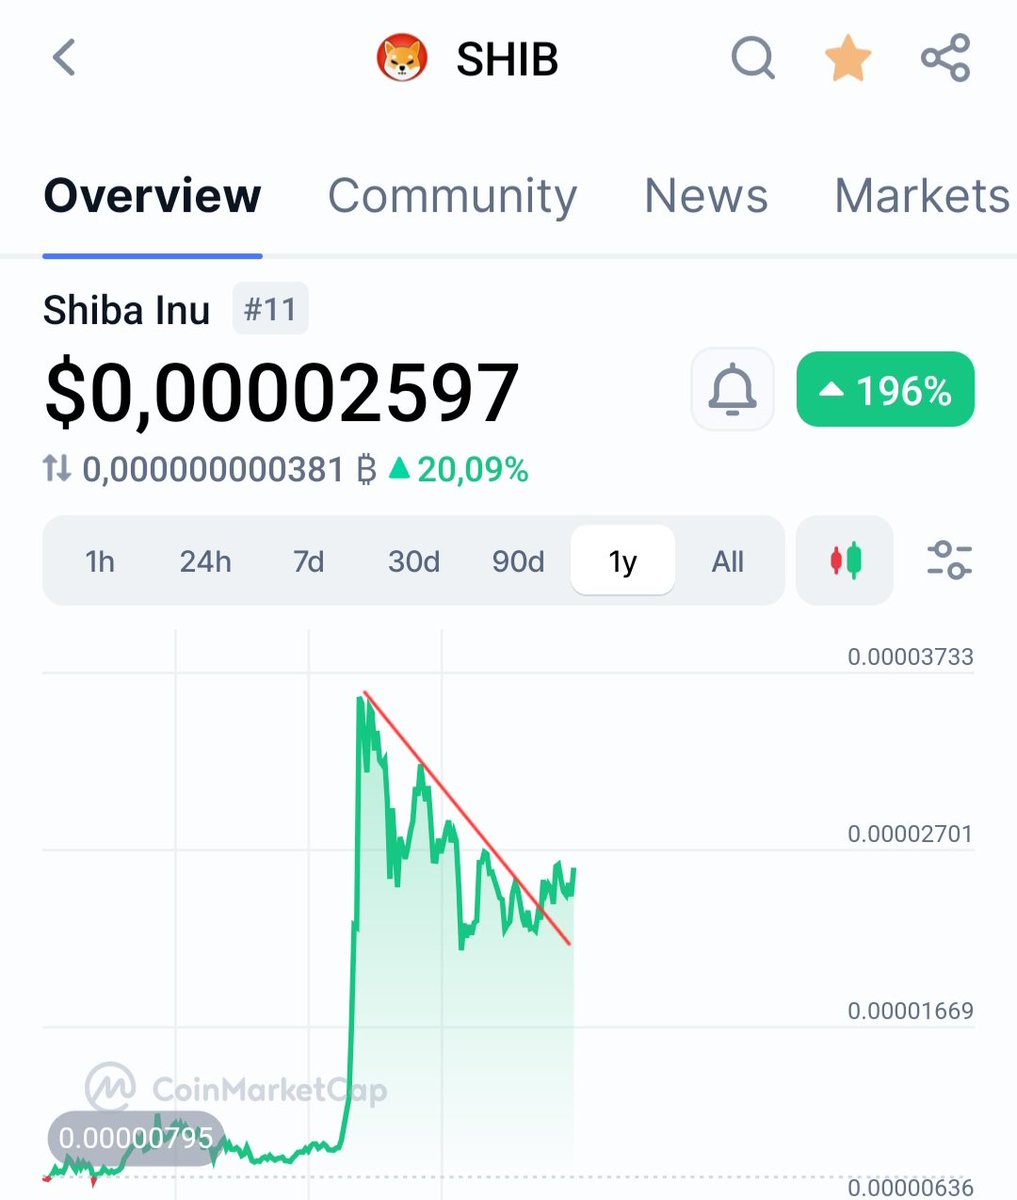 #SHIB will continue to rise! The chart looks bullish enough!📊